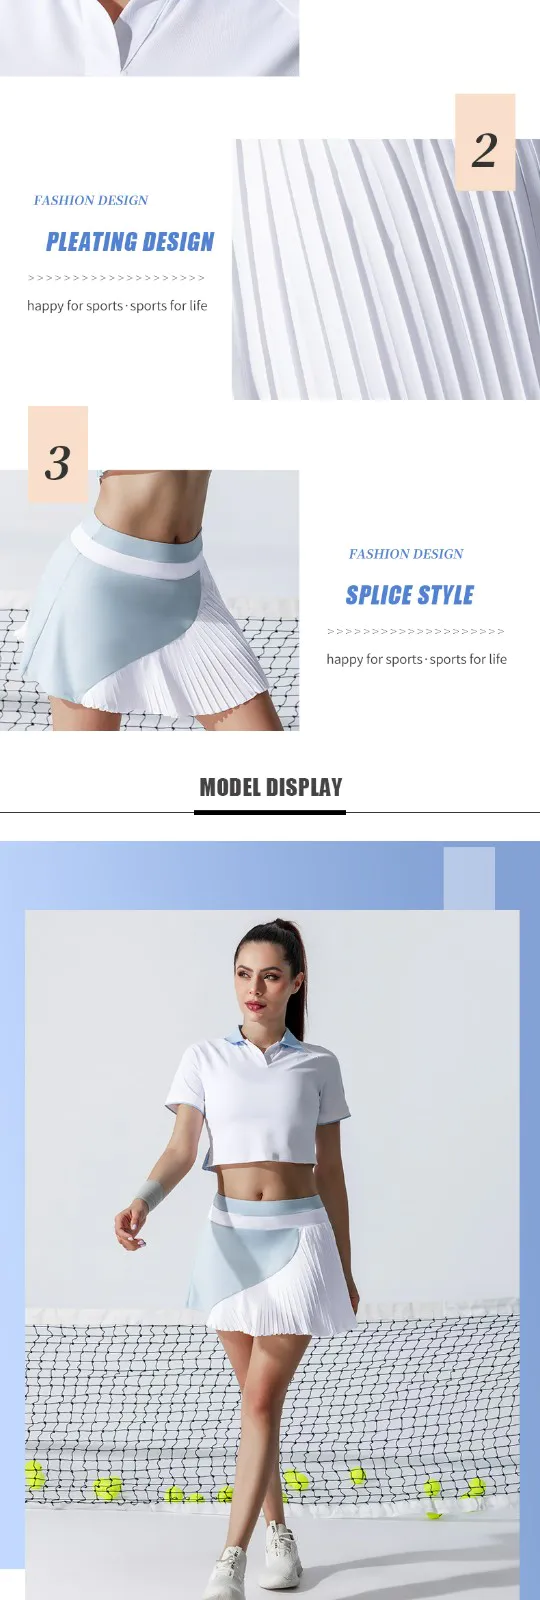 soft tennis outfit woman solutions for sport